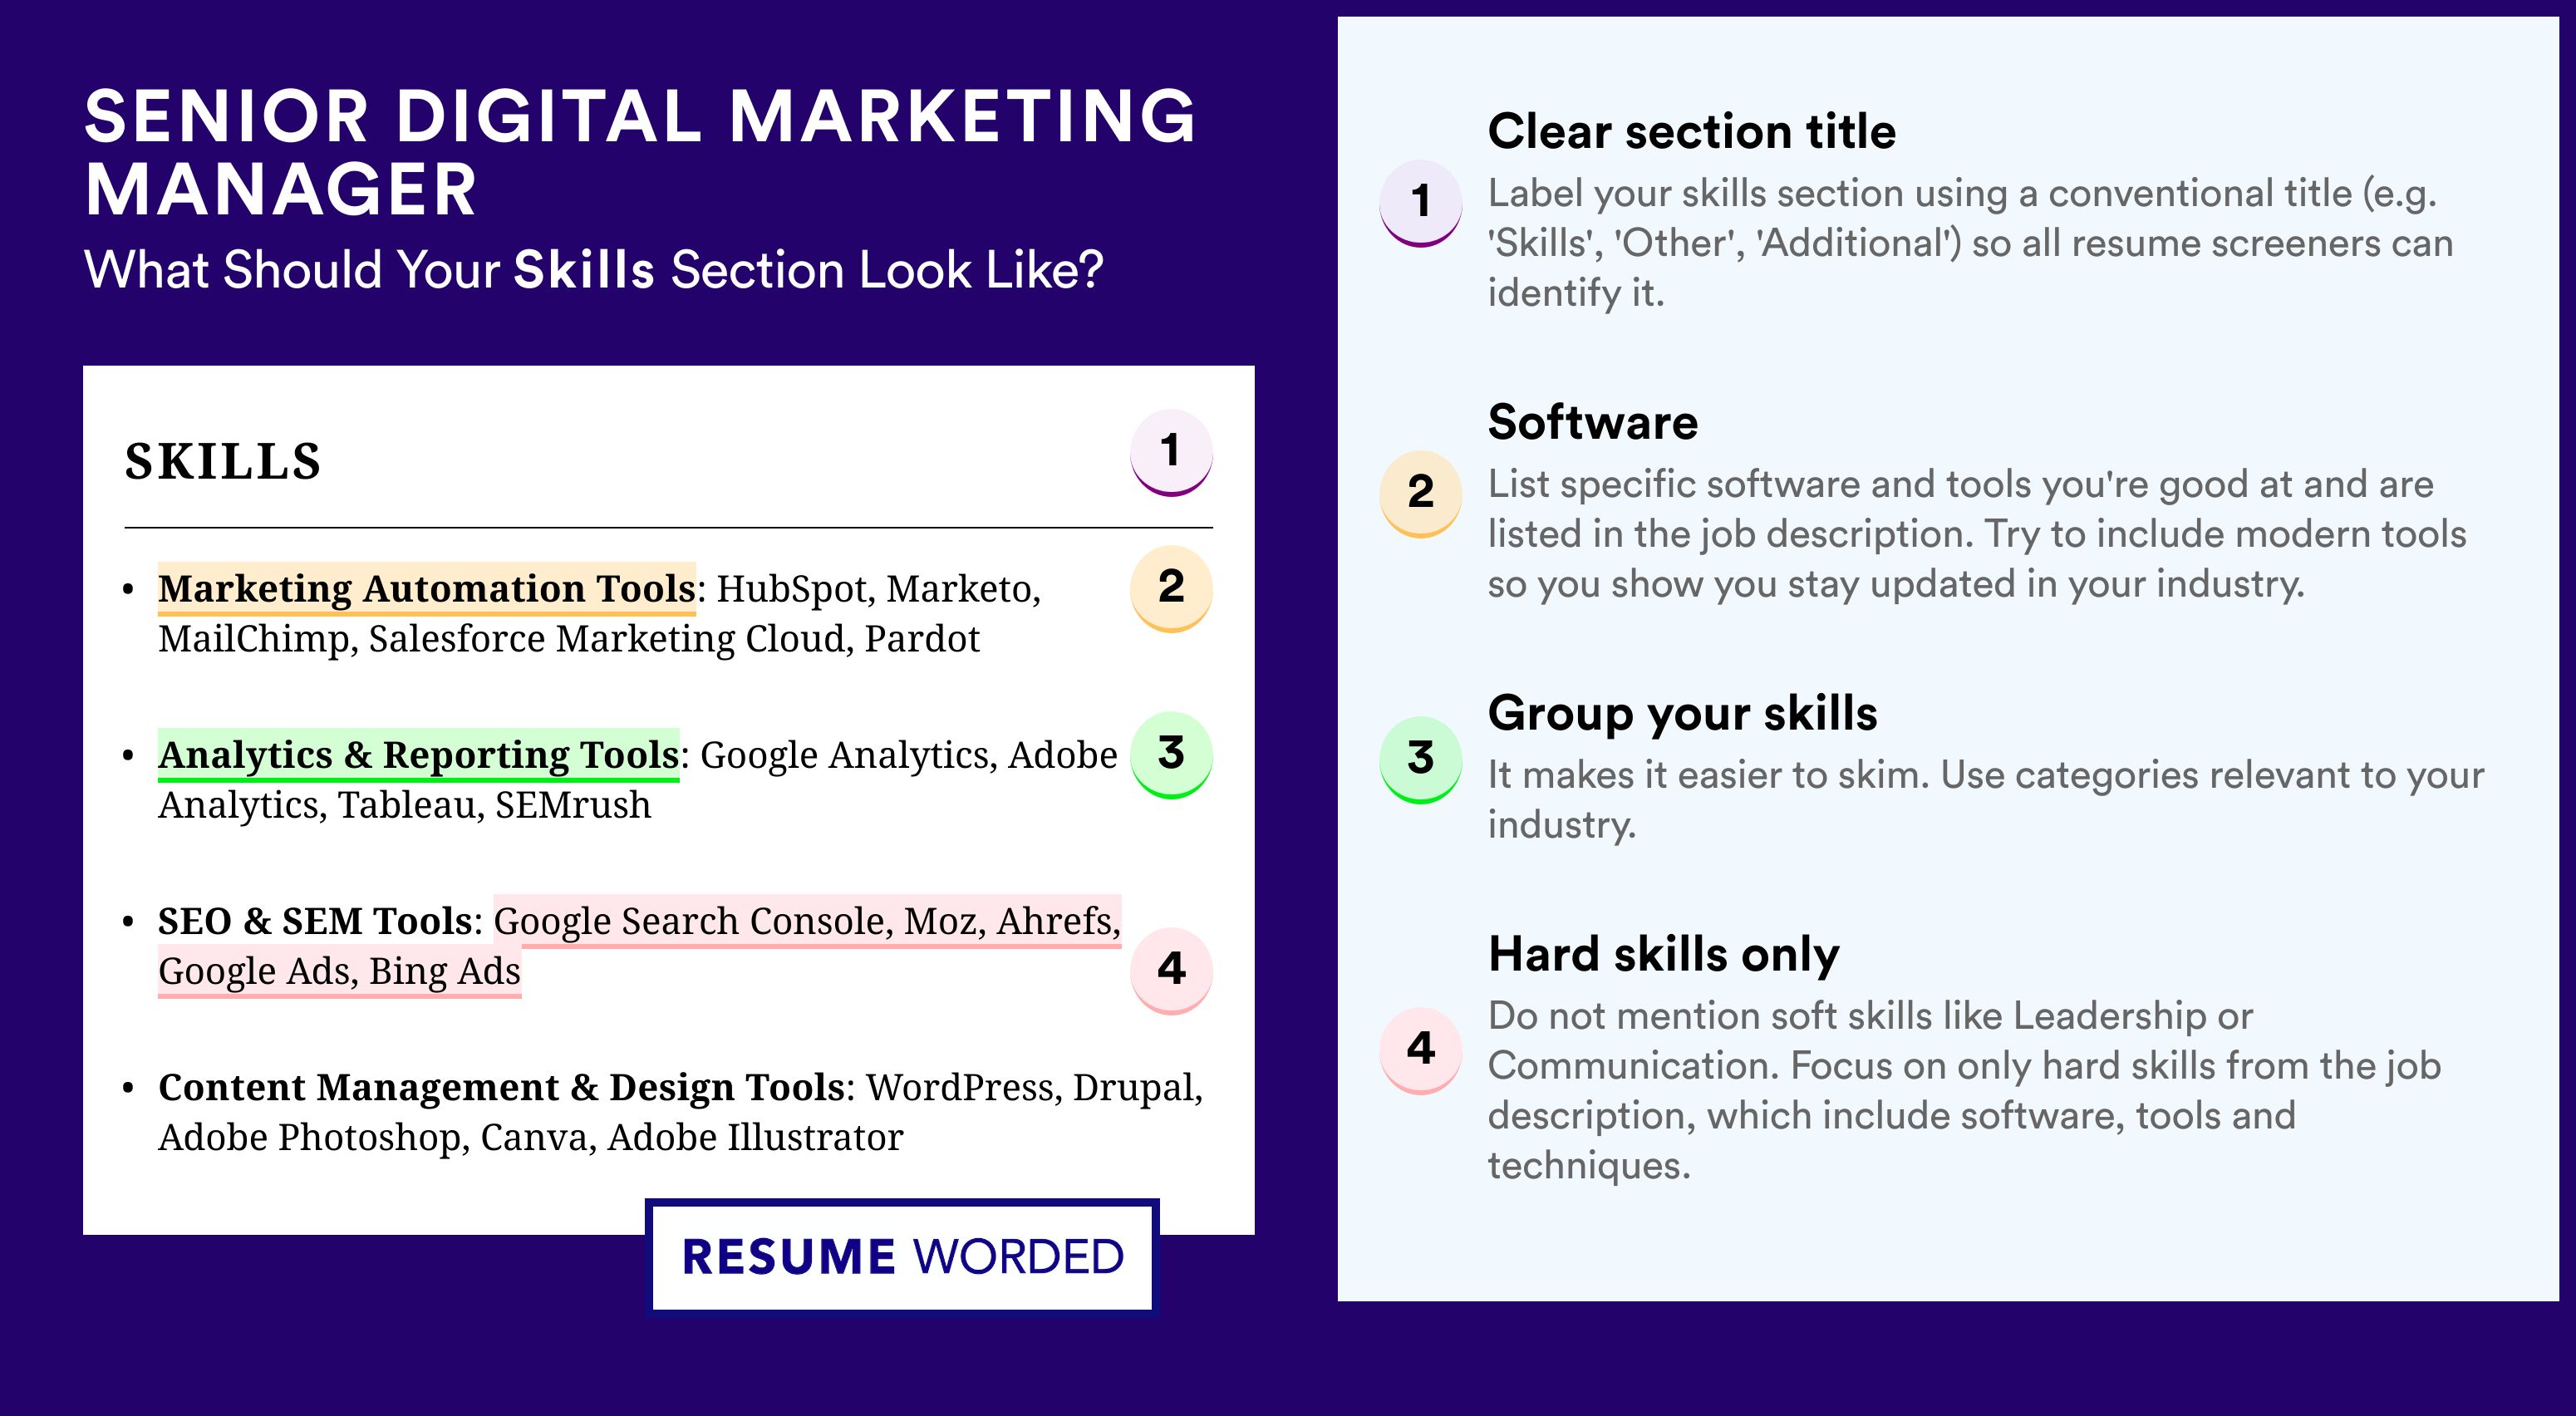 How To Write Your Skills Section - Senior Digital Marketing Manager Roles